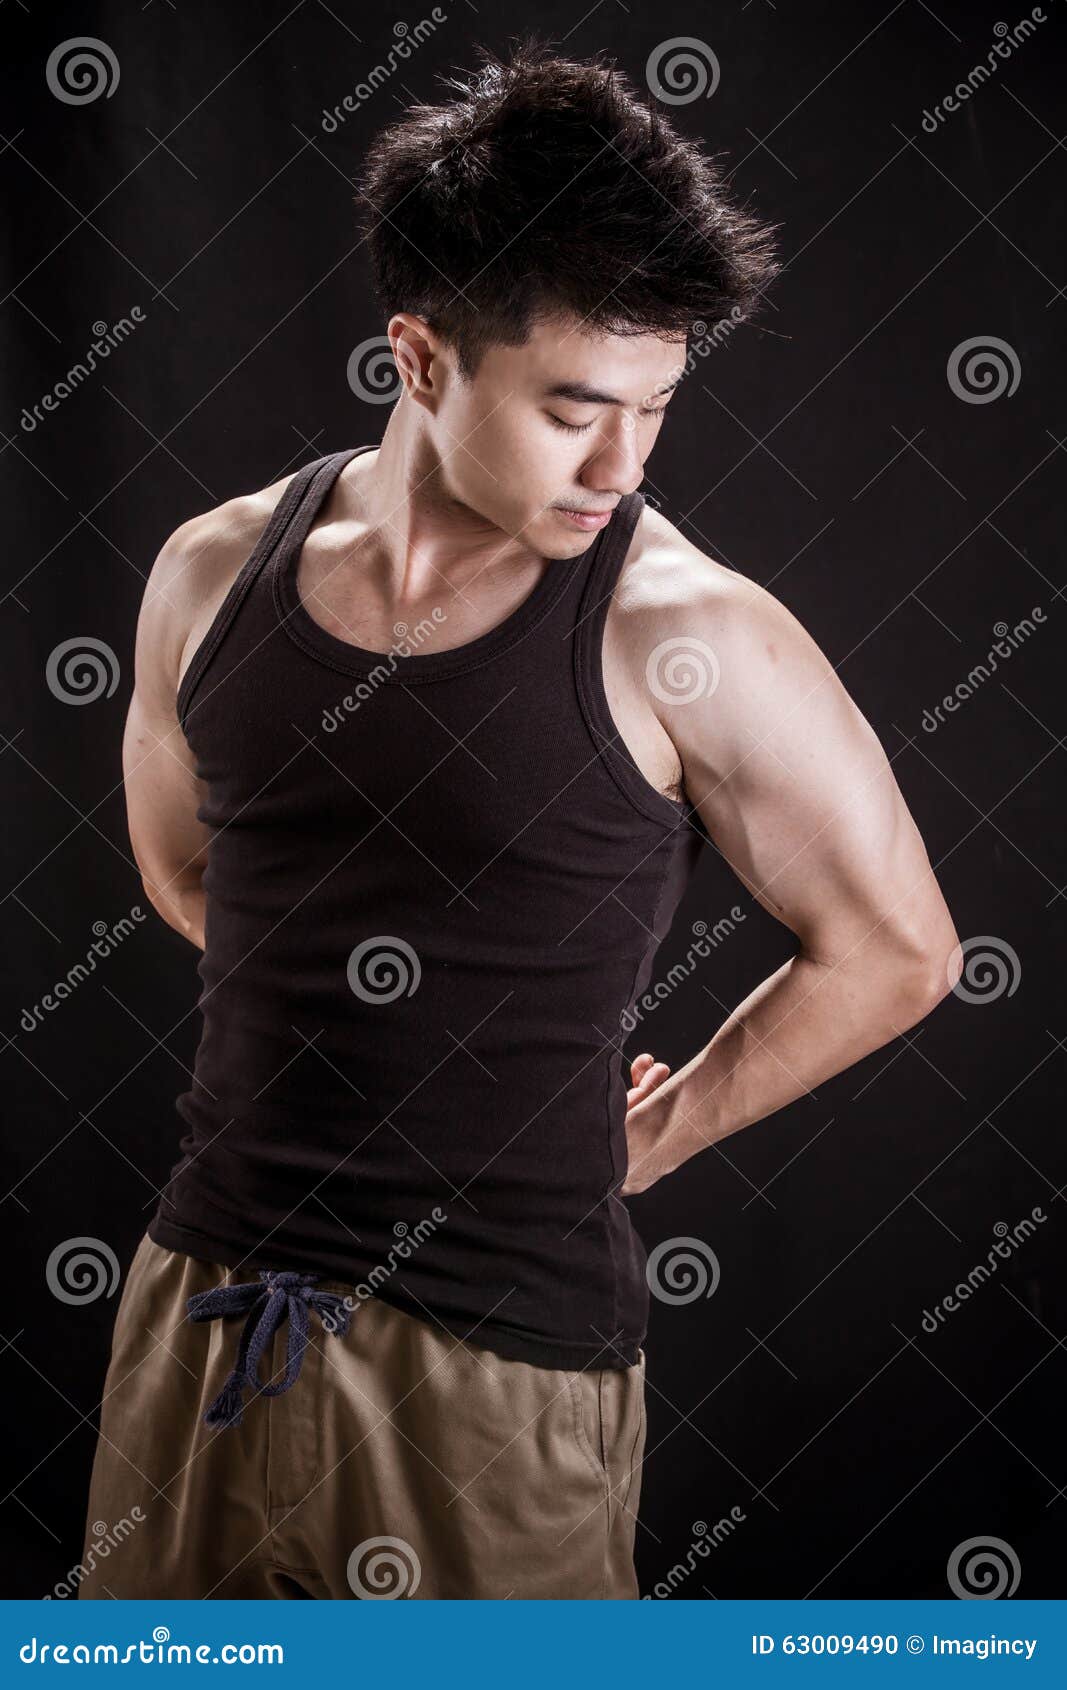 Fitness level young man stock photo. Image of person - 63009490